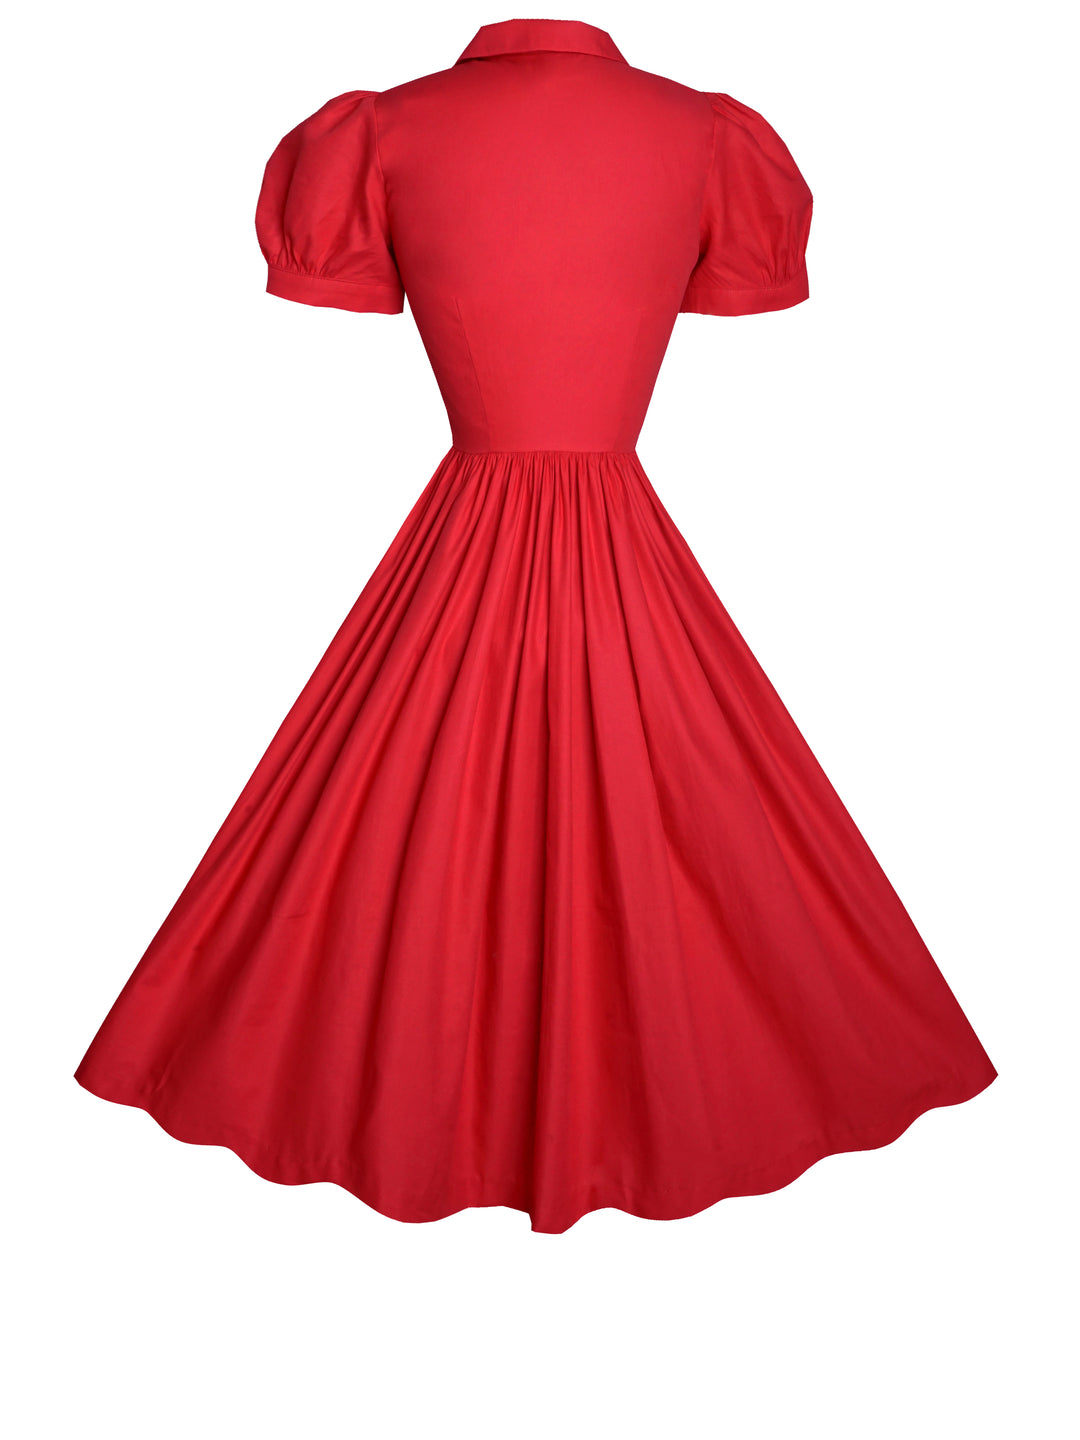 MTO - Judy Dress in Cardinal Red Cotton